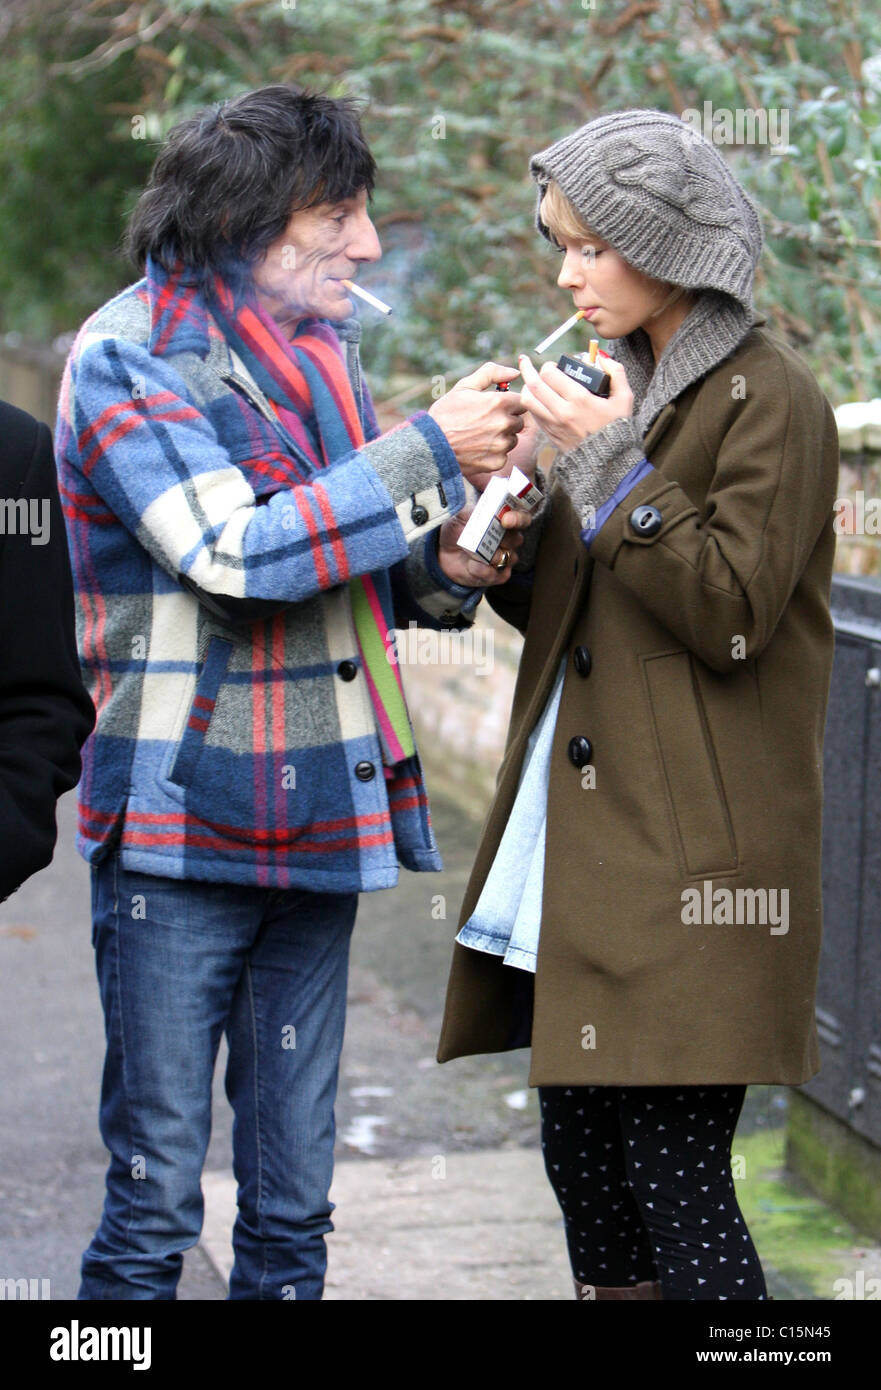 Ronnie Wood and girlfriend Ekaterina Ivanova enjoy a cigarette together while out and about in North London London, England - Stock Photo